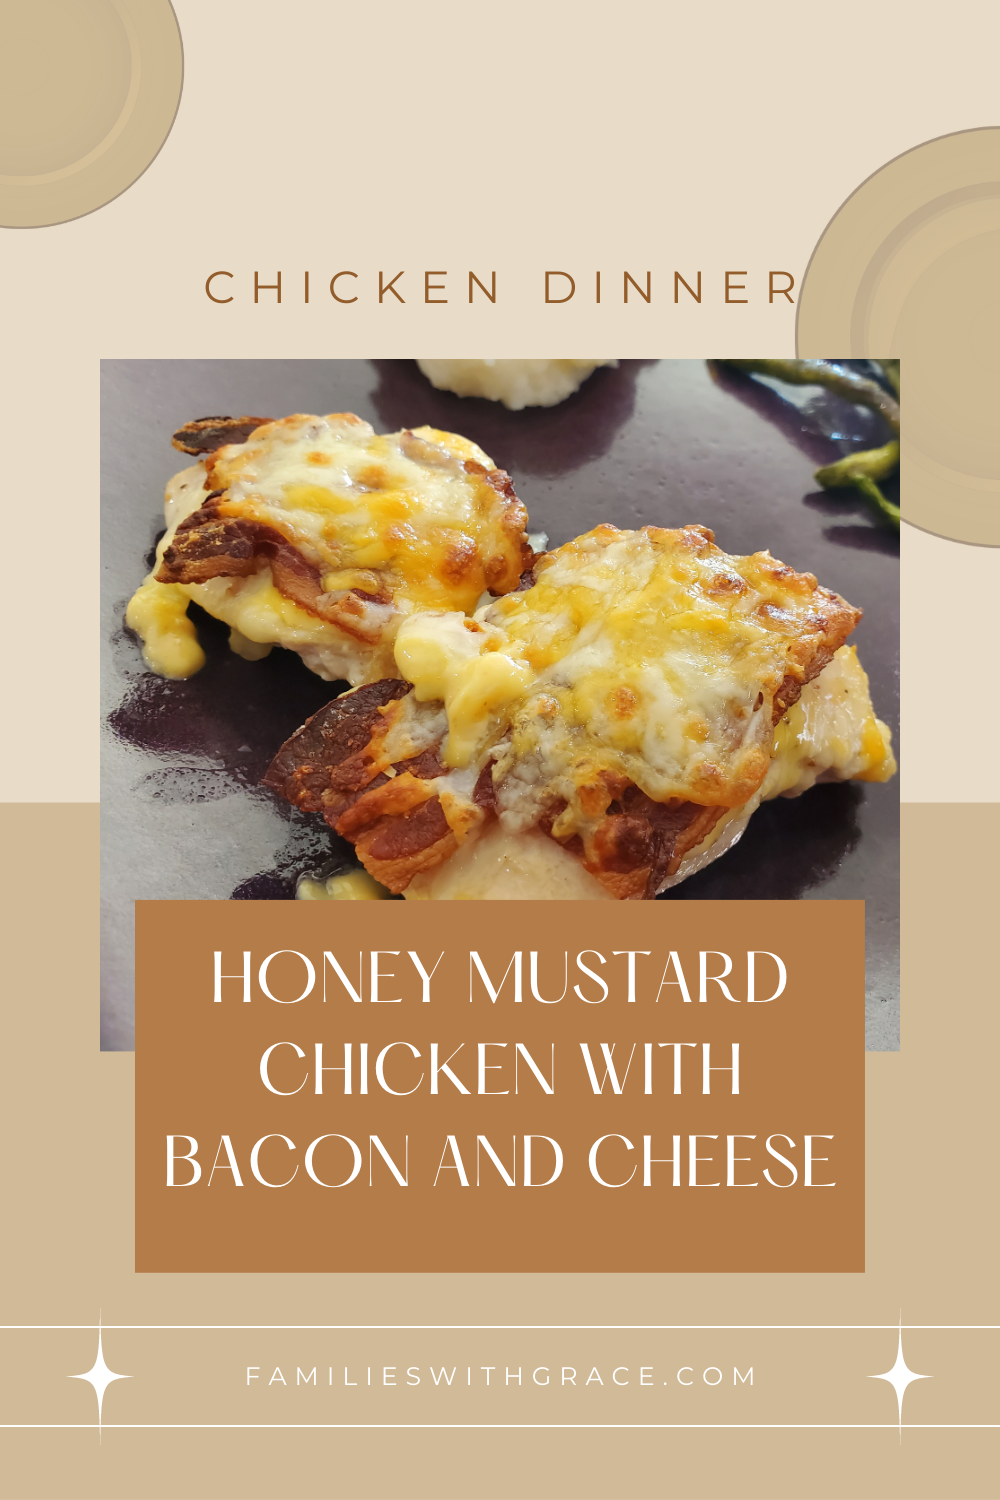 Honey mustard chicken with bacon and cheese